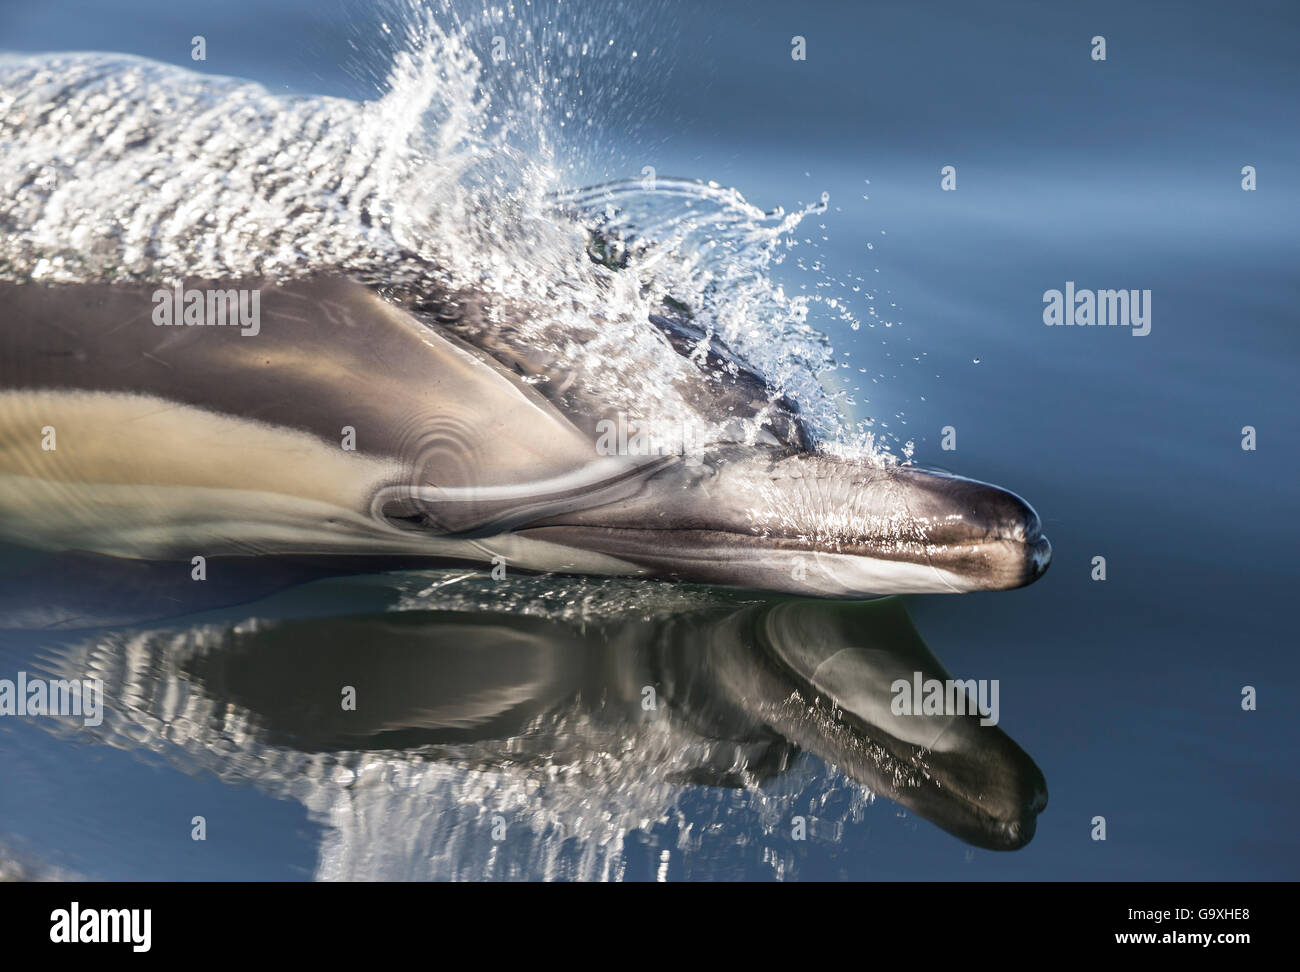 Long-beaked common dolphin (Delphinus capensis) porpoising in still water, False Bay, South Africa Stock Photo